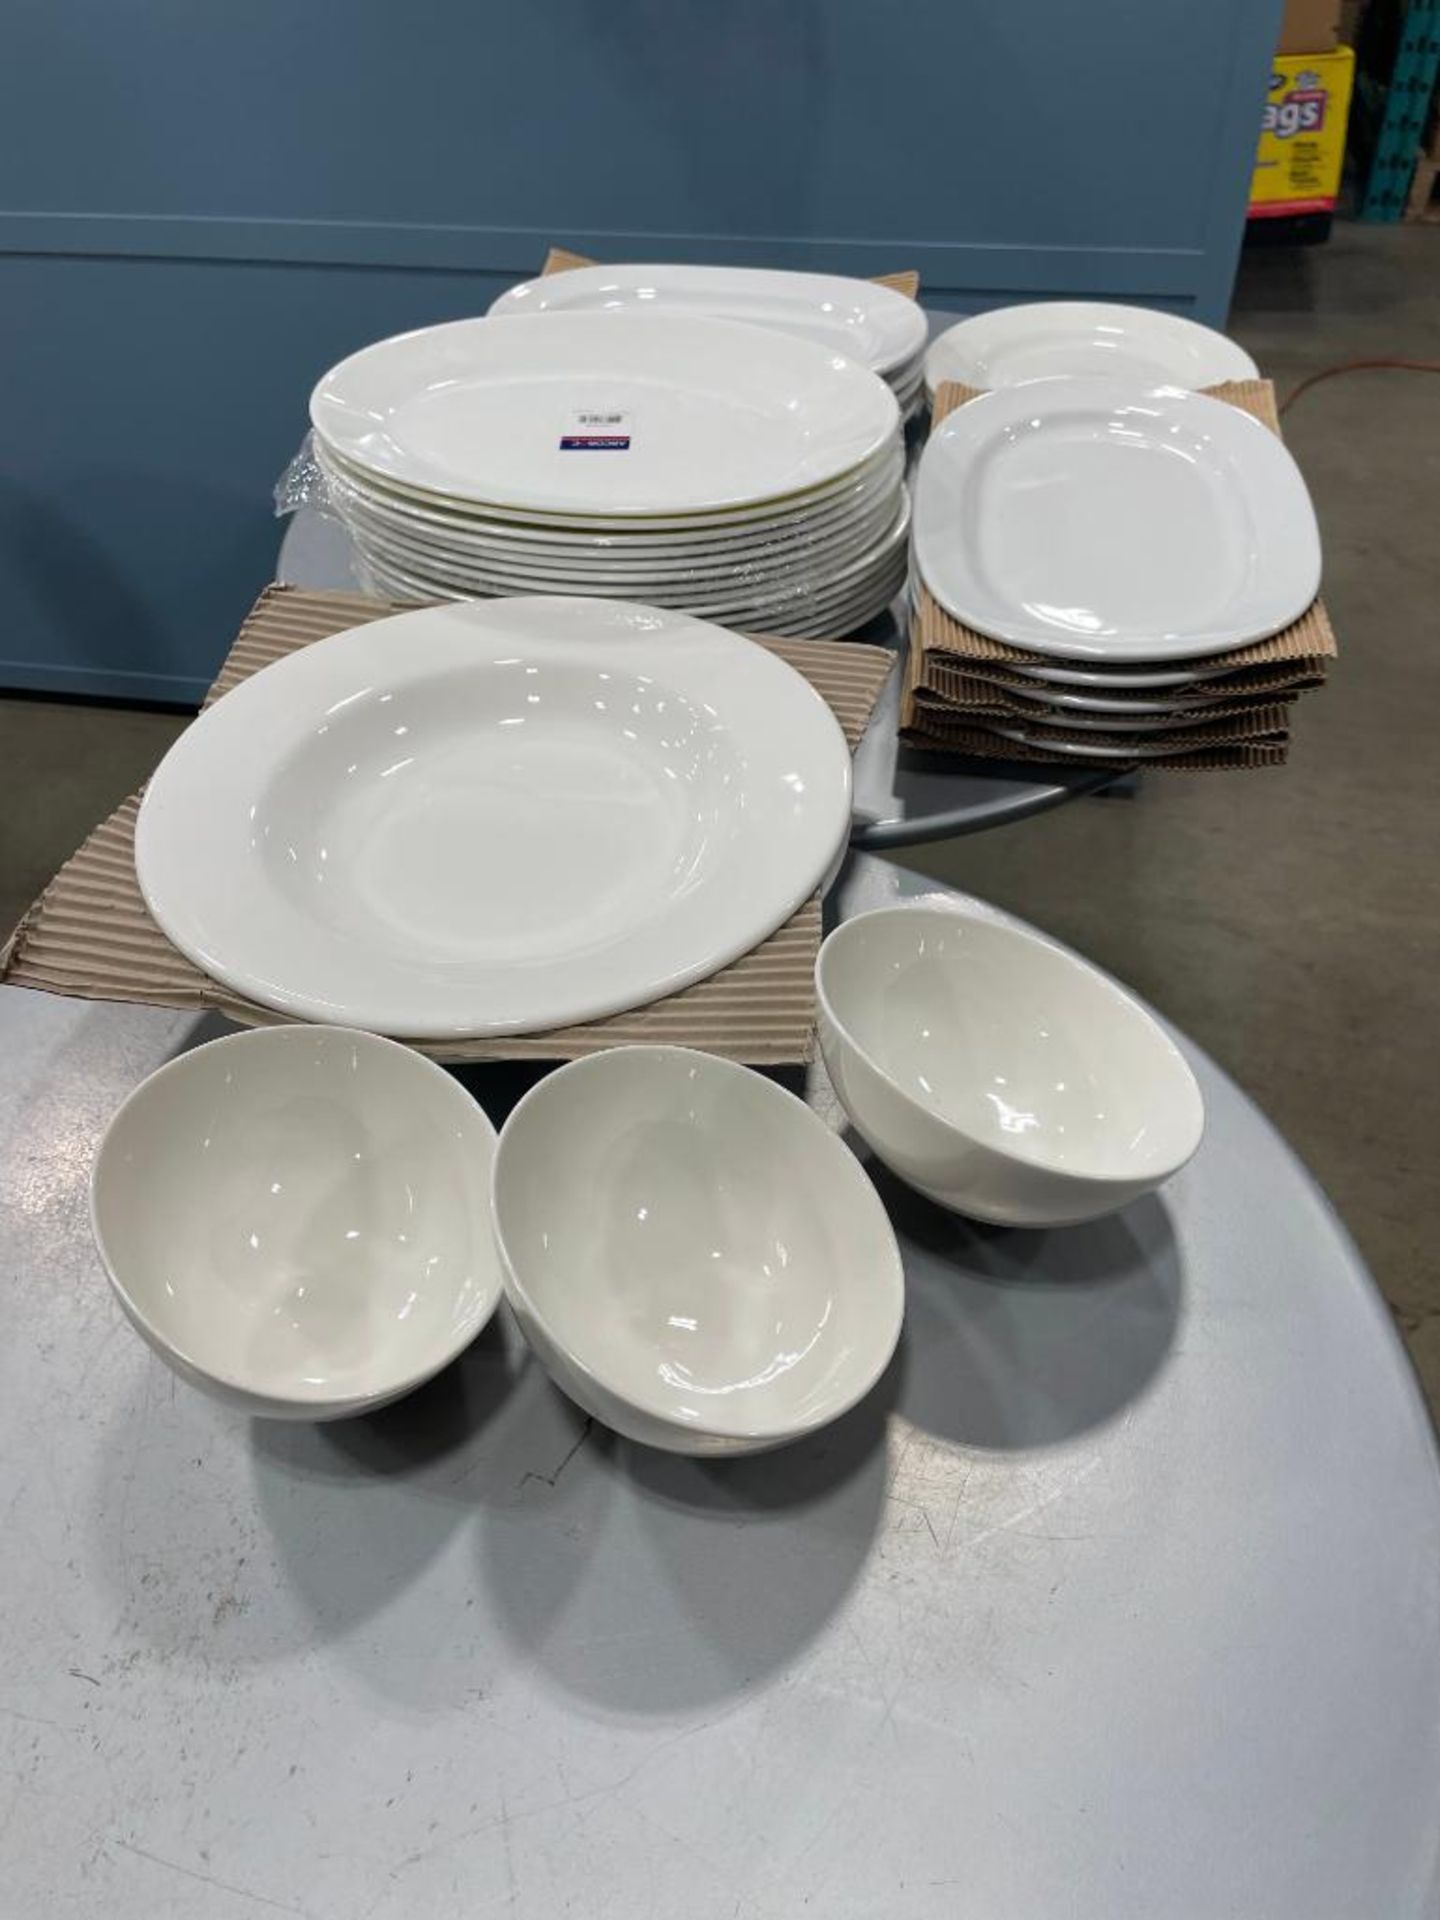 30 PIECES OF ASSORTED ARCOROC DINNERWARE - Image 3 of 4